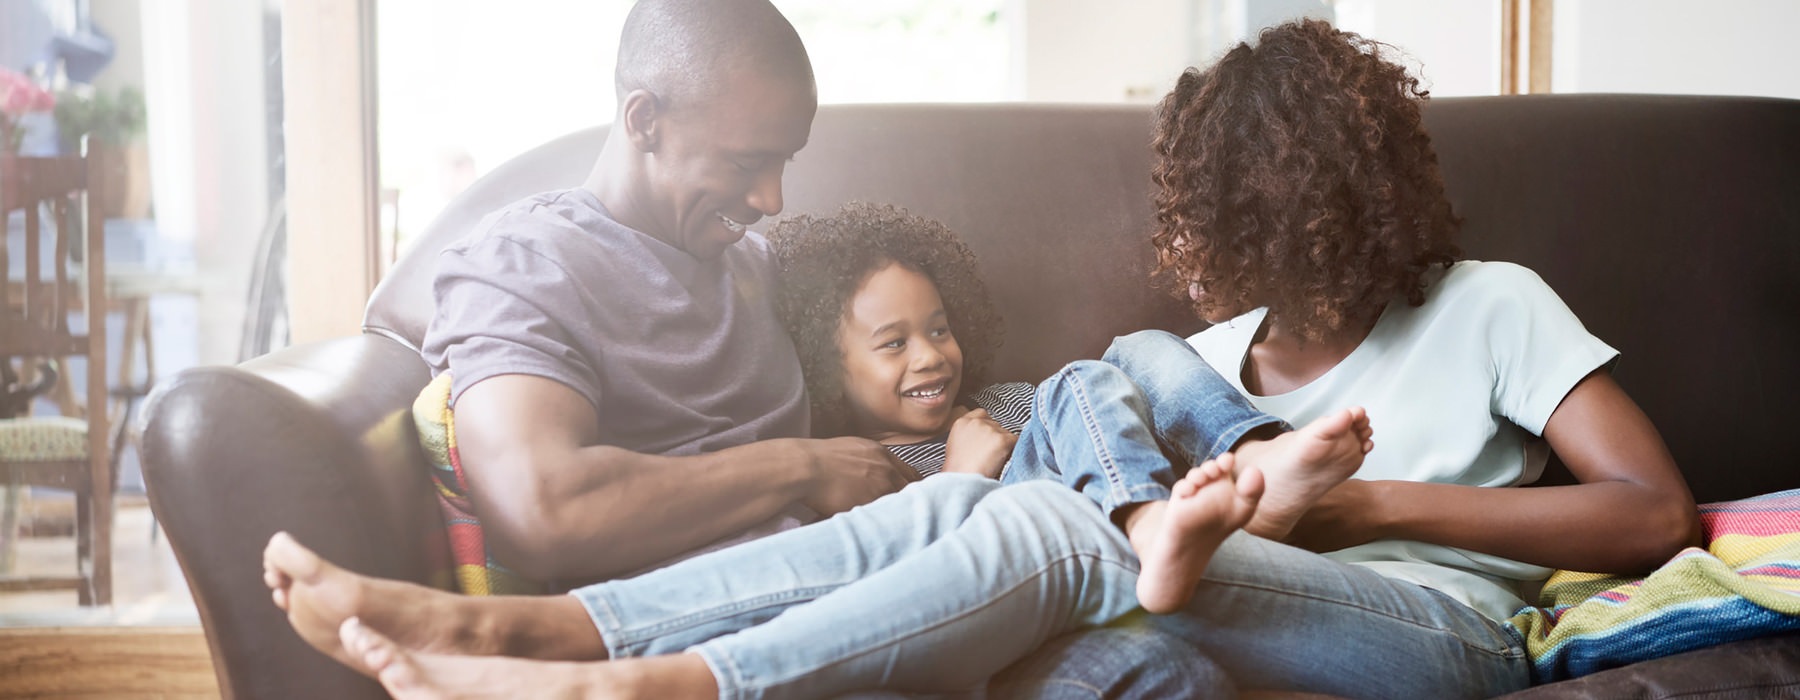 young family of three relax together on living room couch